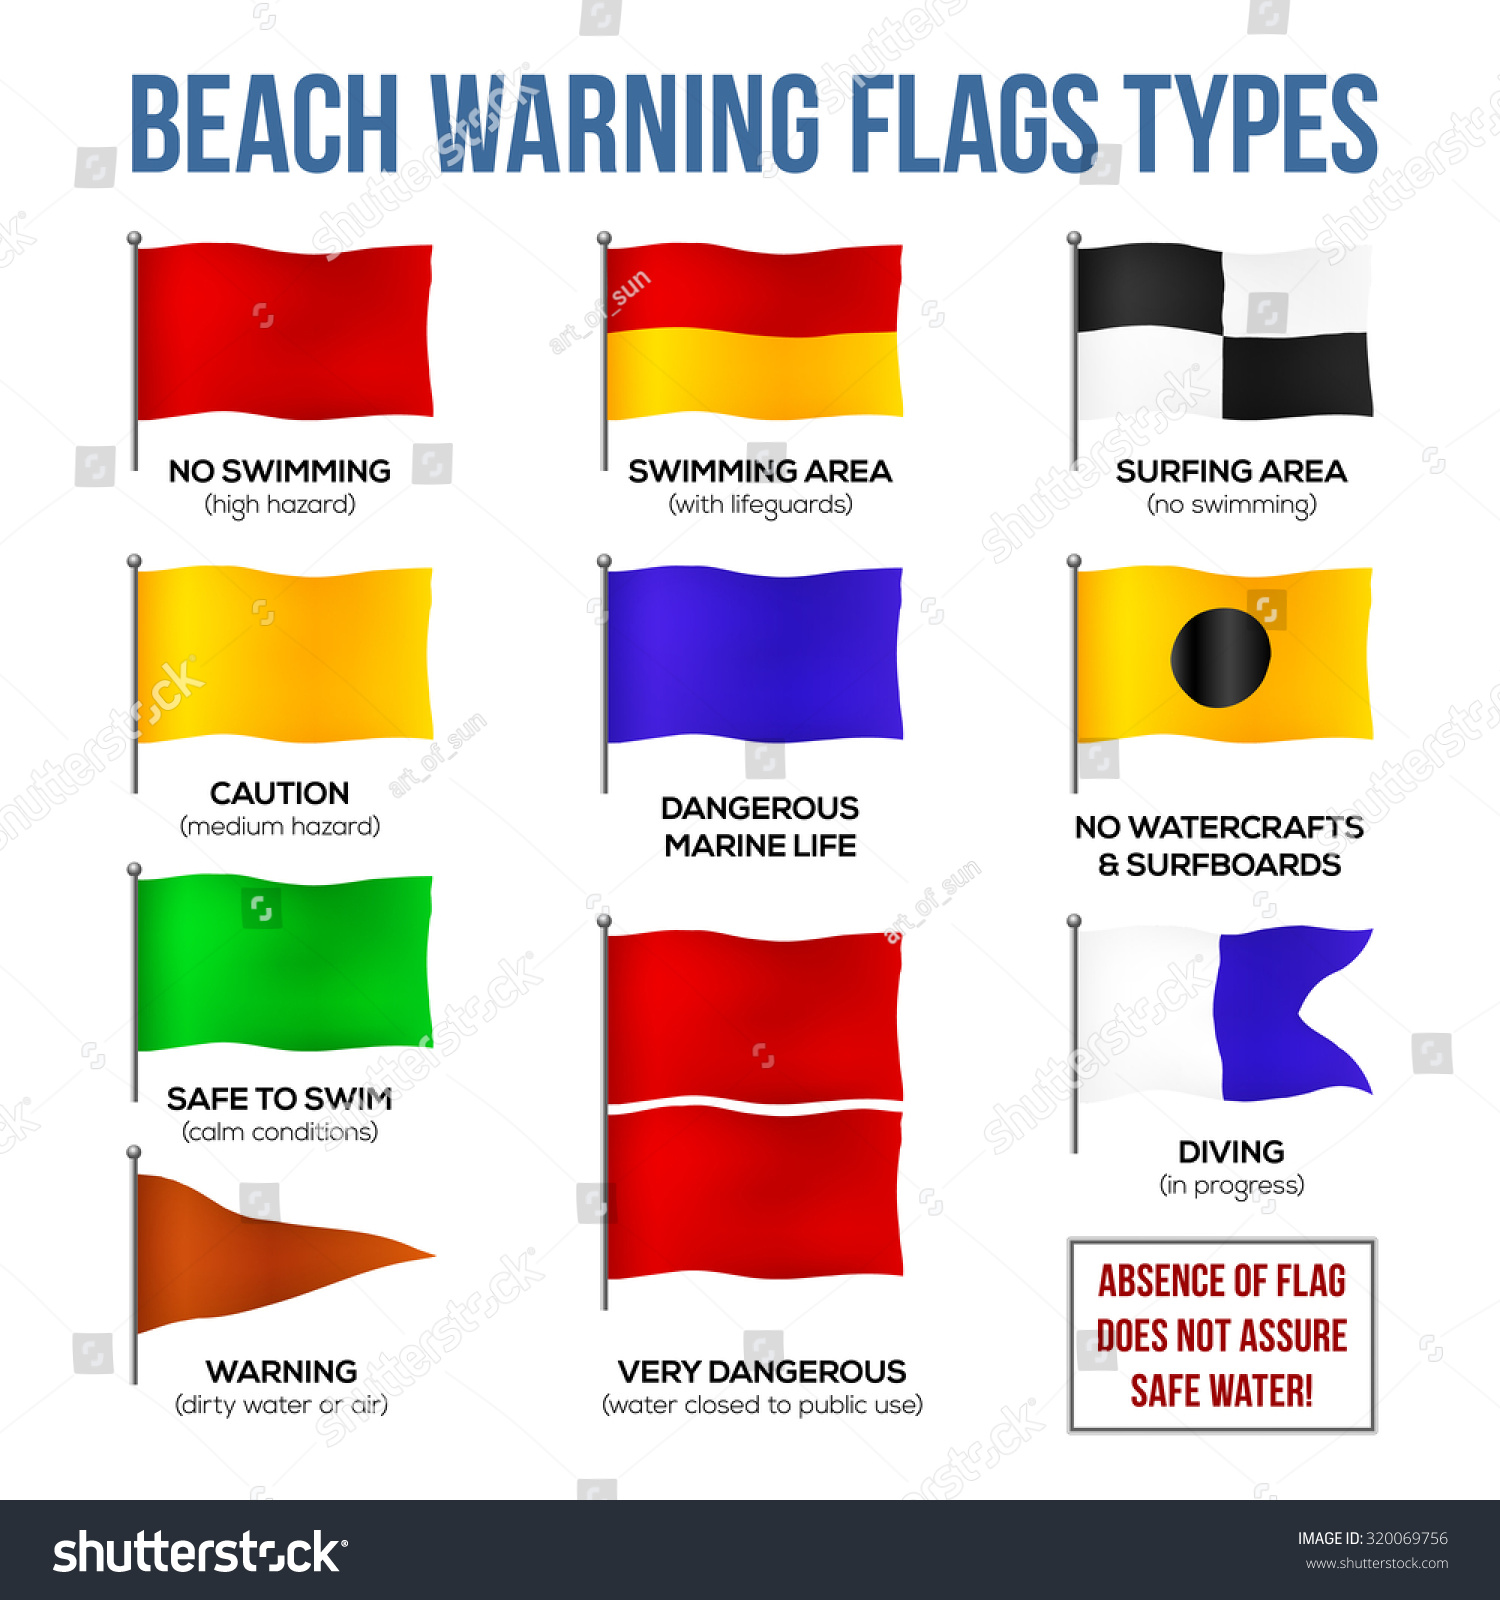 Beach Flags And What They Mean